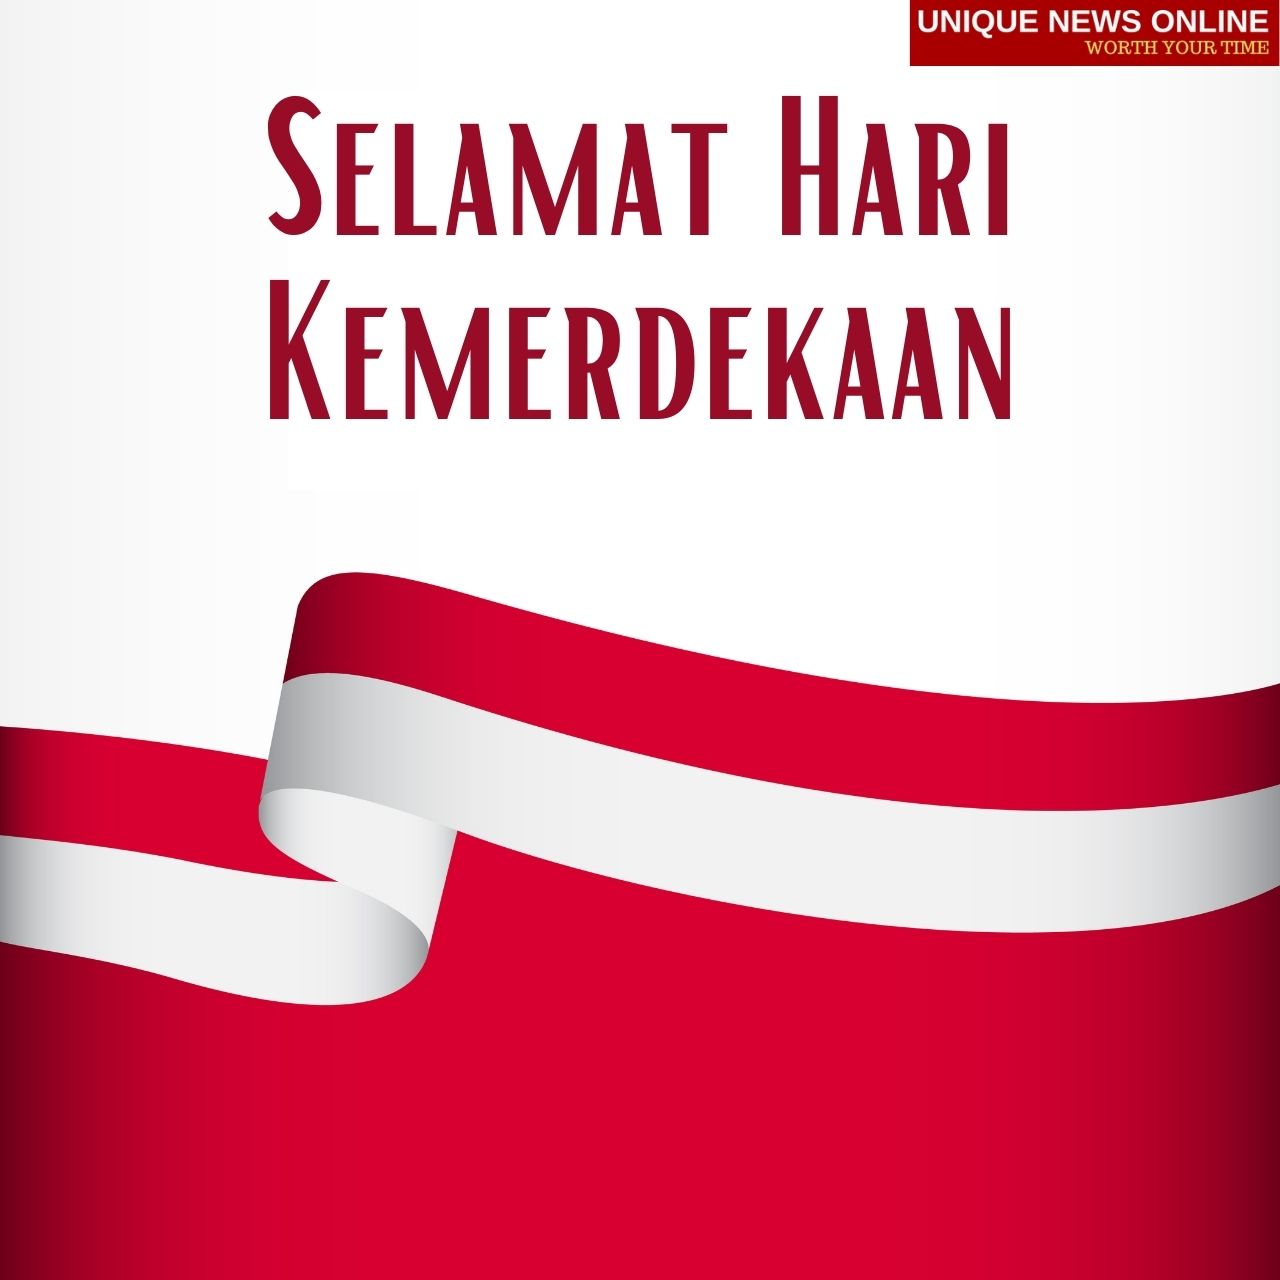 20+ Best Selamat Hari Kemerdekaan 2021 HD Images, Quotes, Wishes, Messages and Greetings to greet Siapa pun